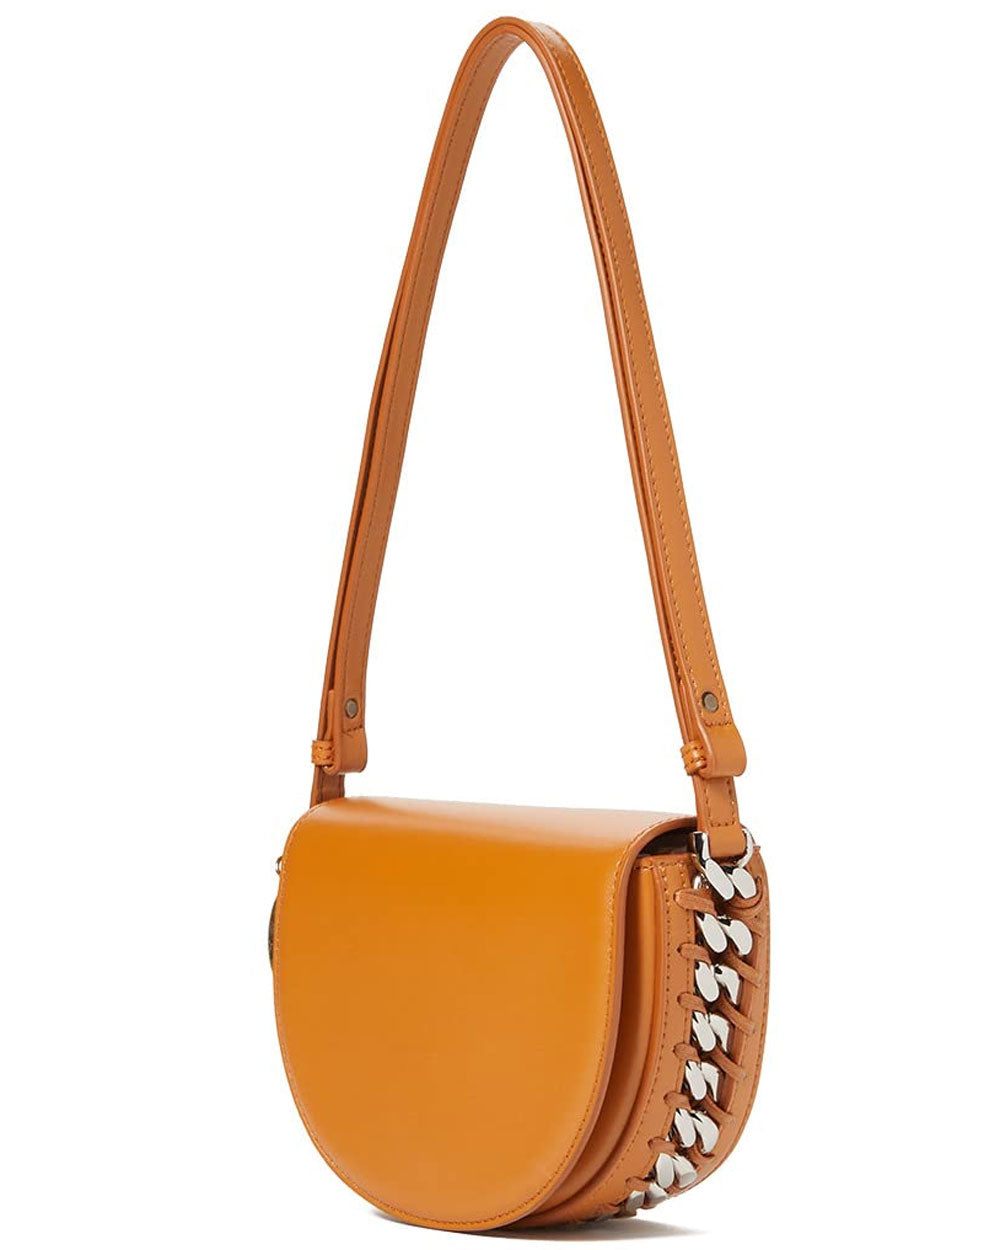 Small Flap Shoulder Bag in Mais